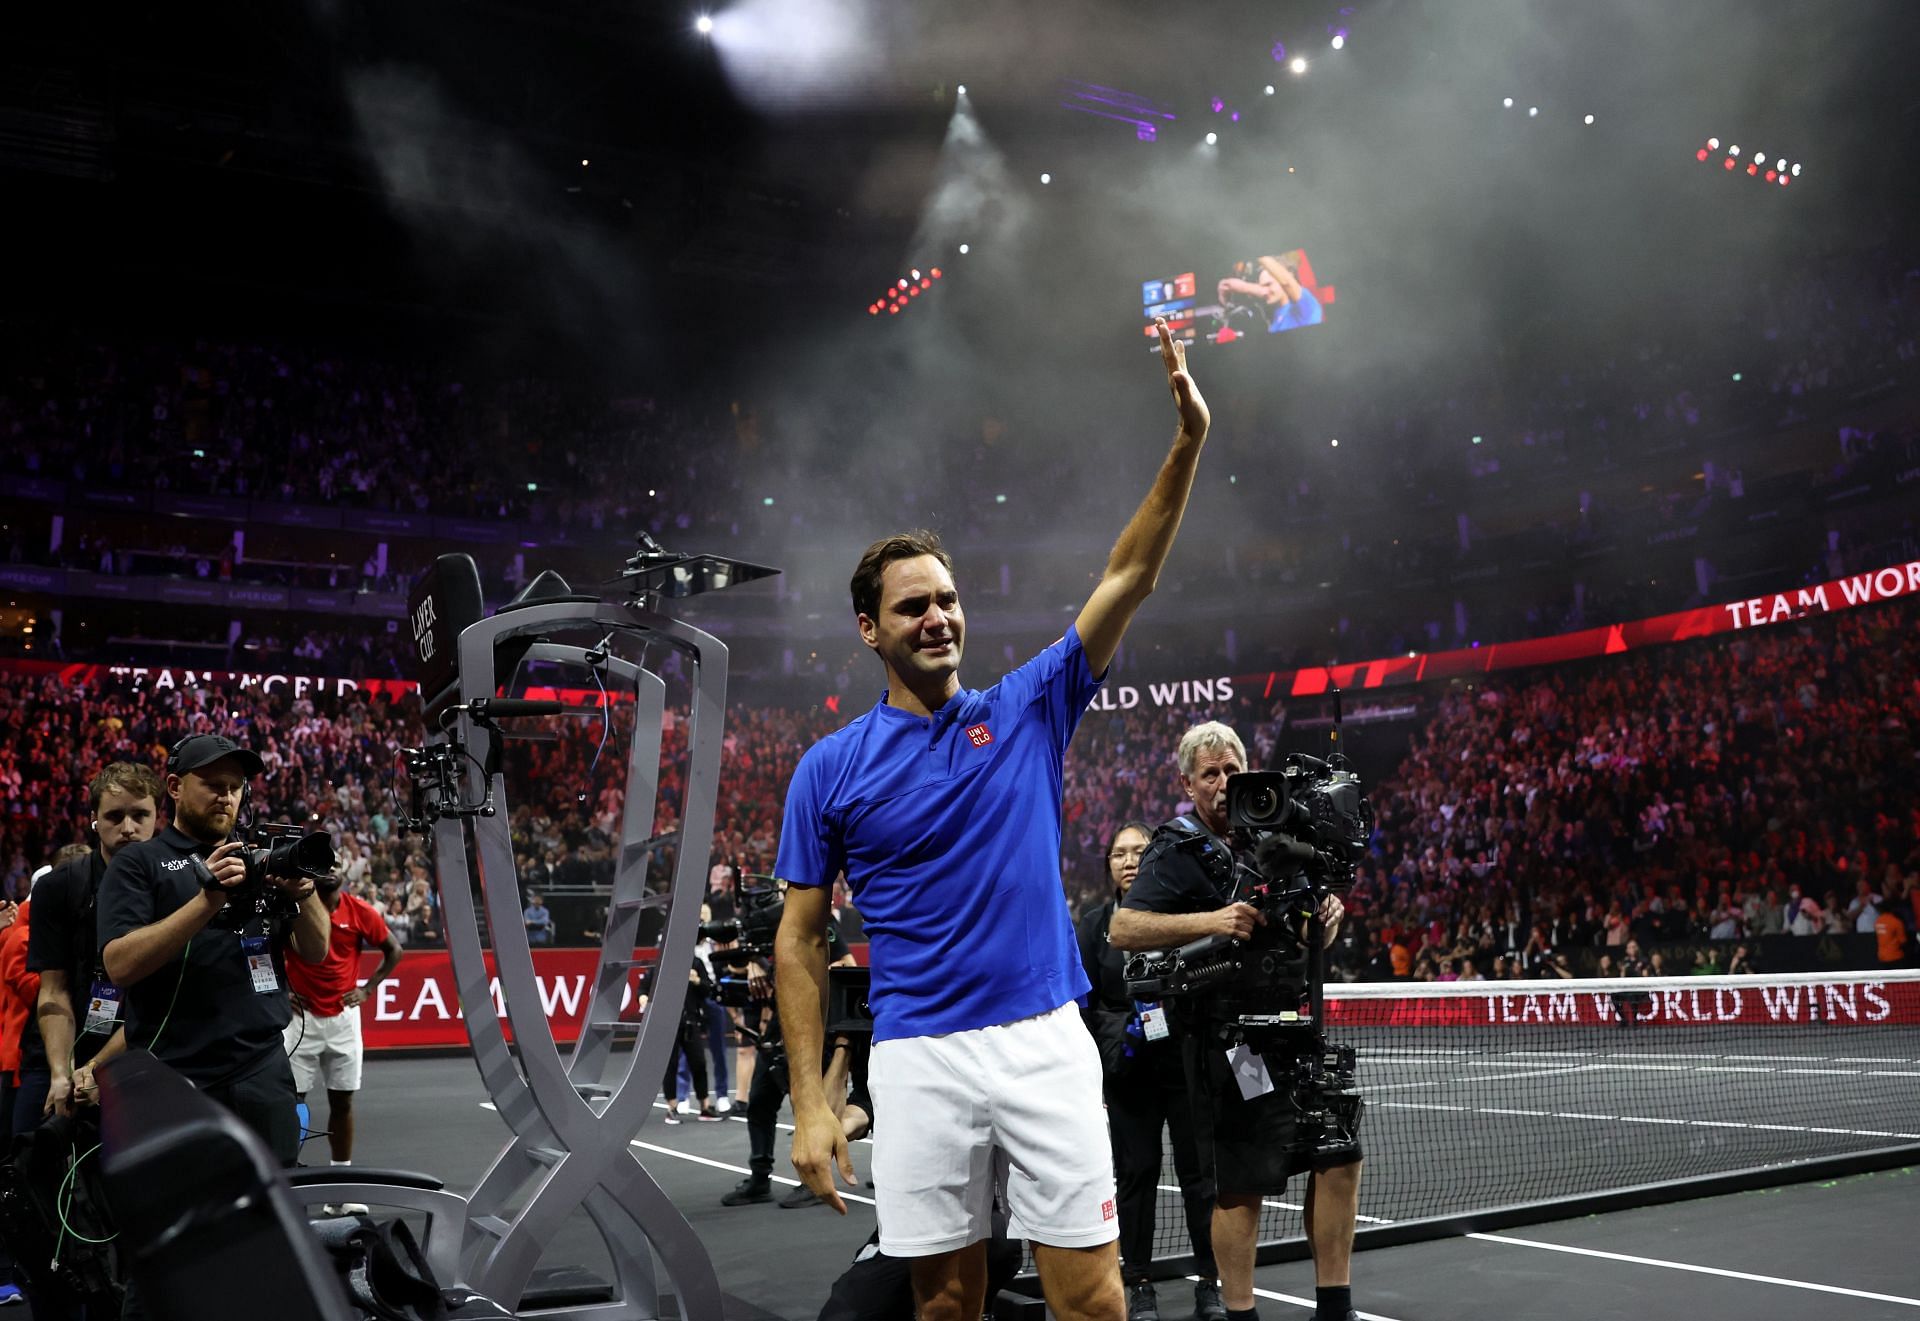 Roger Federer bidding his fans a final goodbye at the 2022 Laver Cup 